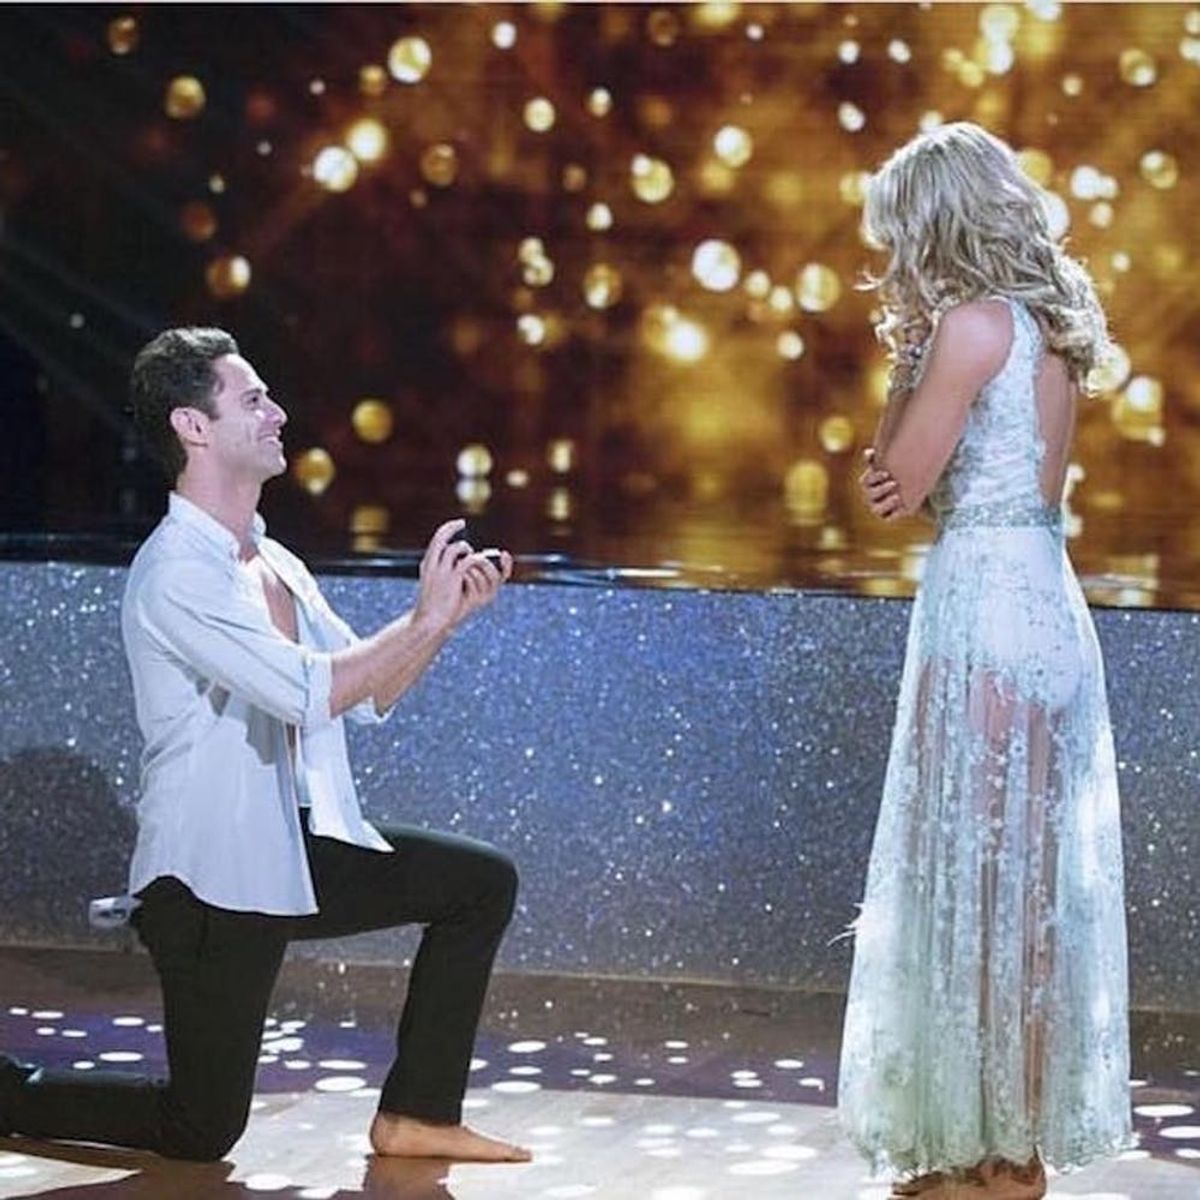 Morning Buzz! This Surprise Proposal Live on DWTS Will Melt Your Heart + More